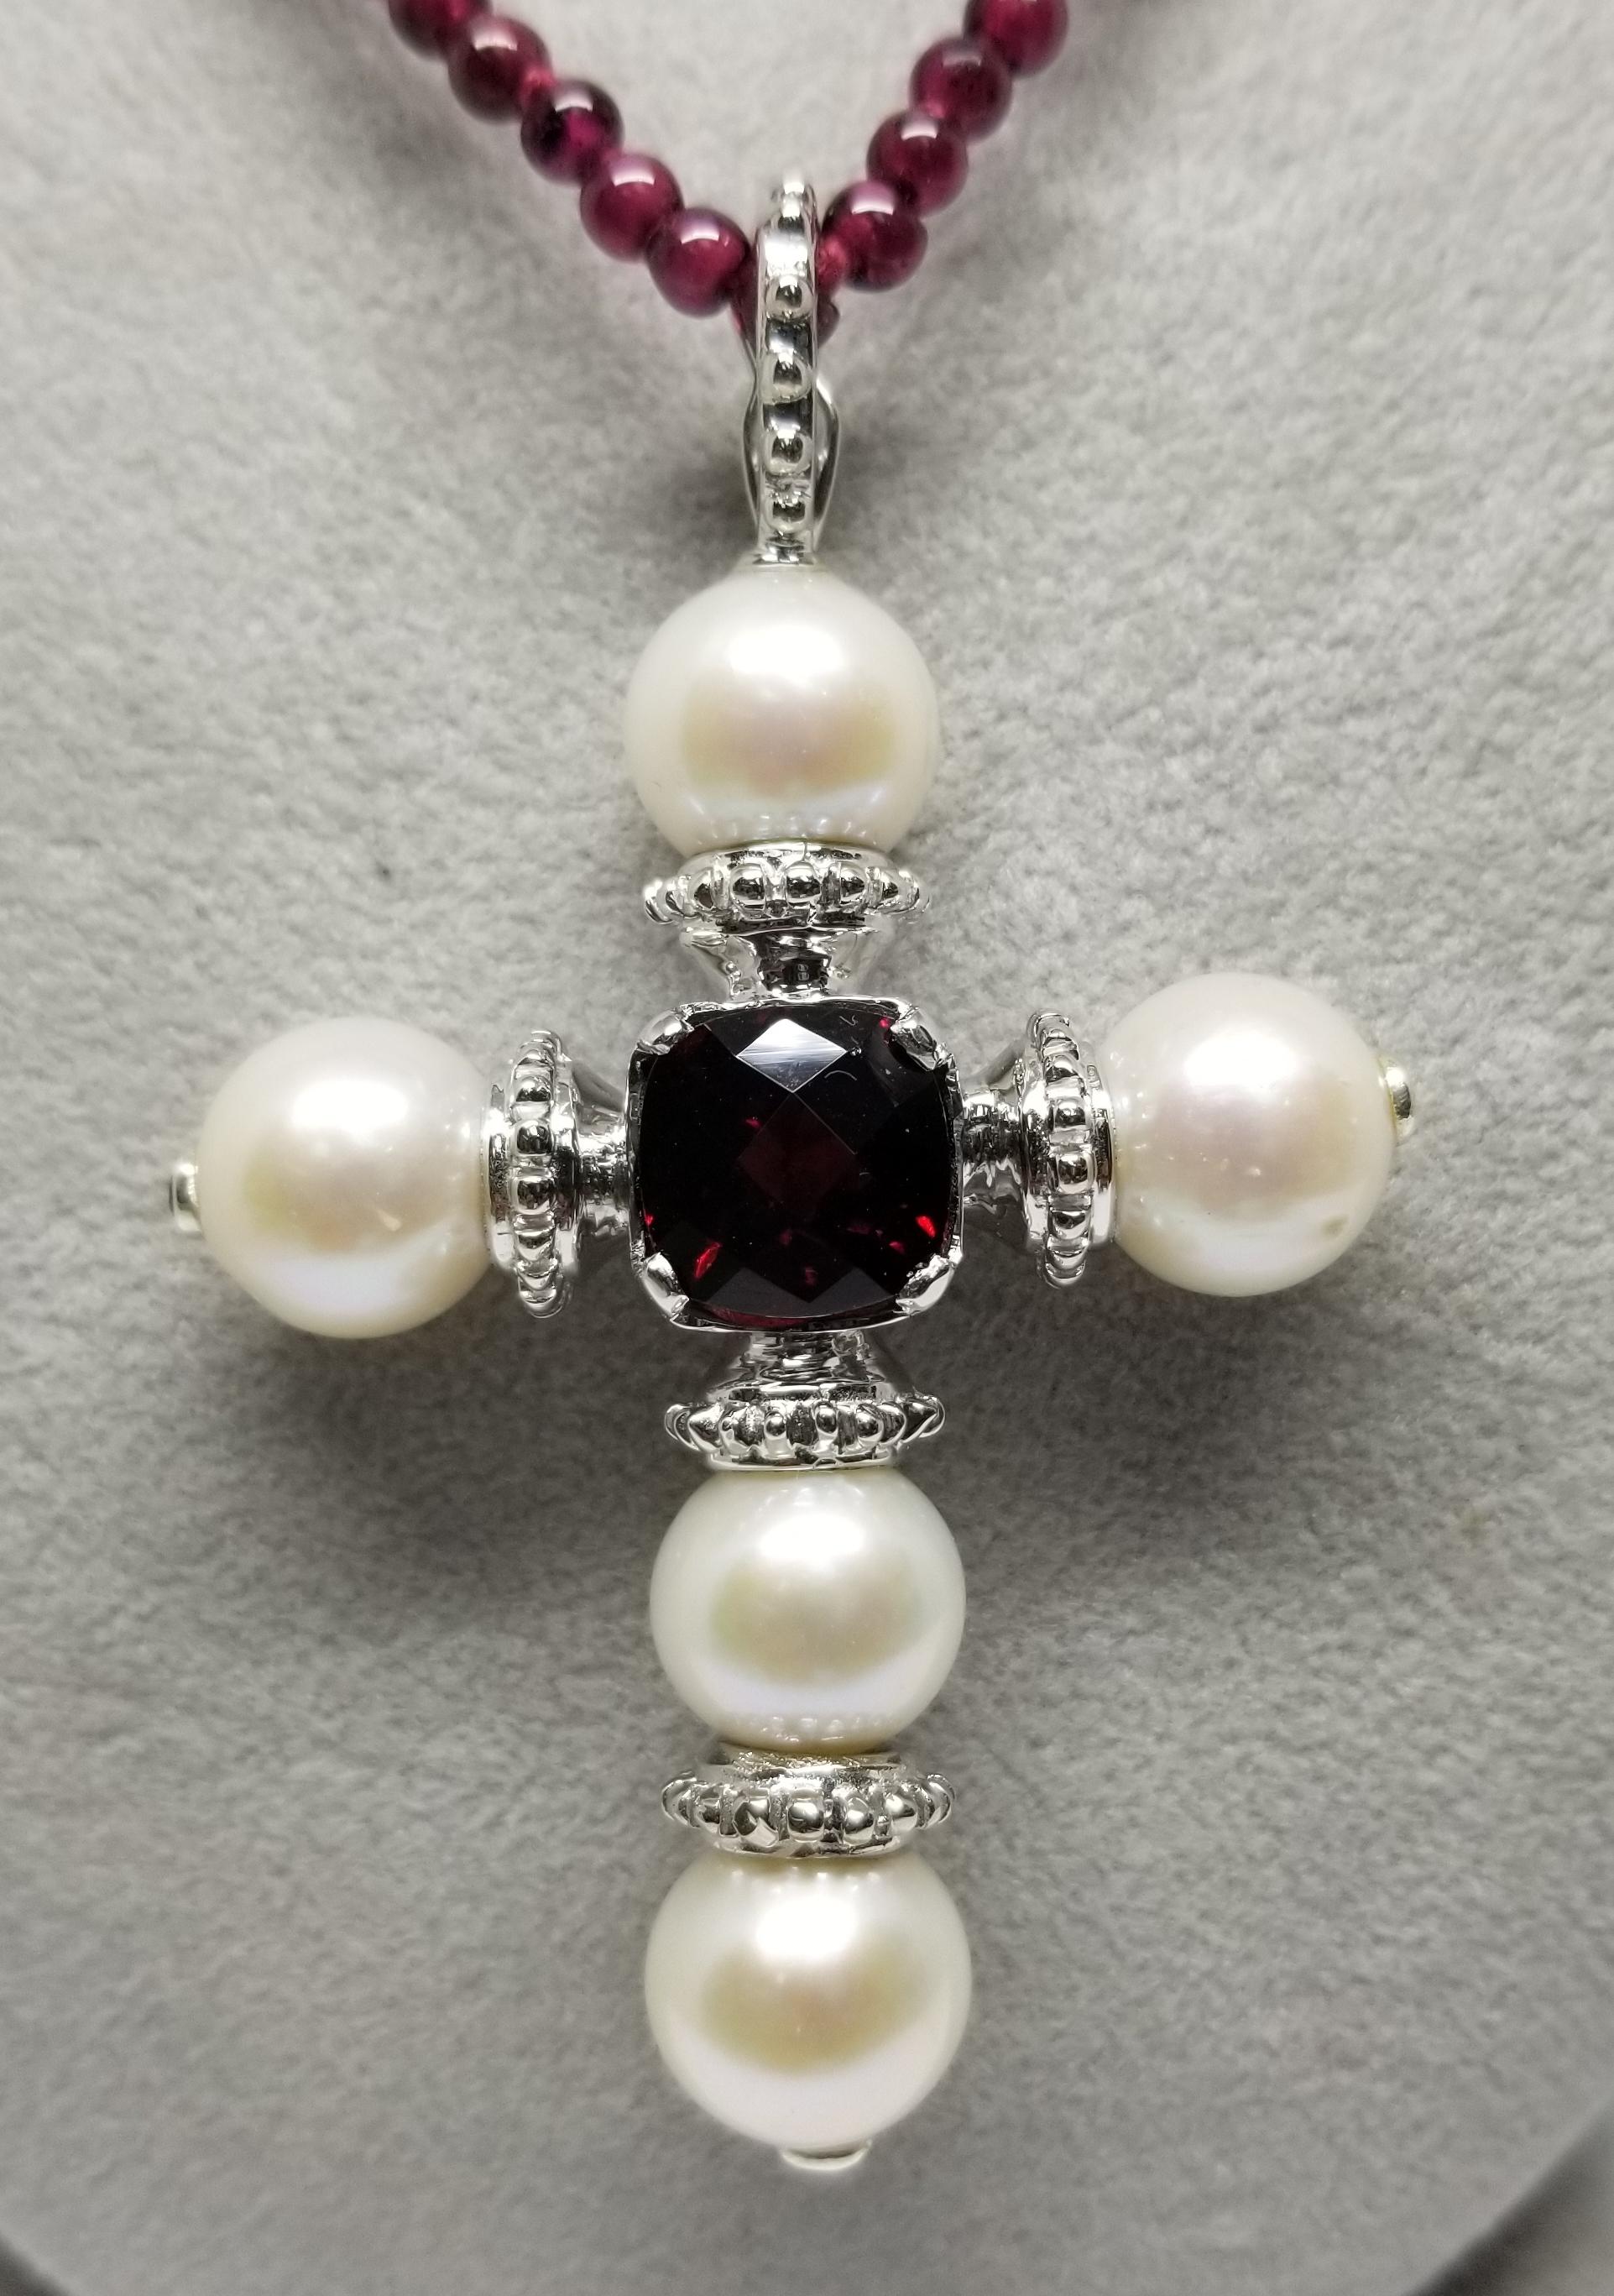 Sterling Silver Fresh Water Pearl cross with 5 pearls measuring 10.5mm, with a cushion cut garnet weighing 5.48cts.,  3 round garnets as accents on the ends of the pearls set in a bezel.  The clasp can open and be put on pearls or as a bail on a